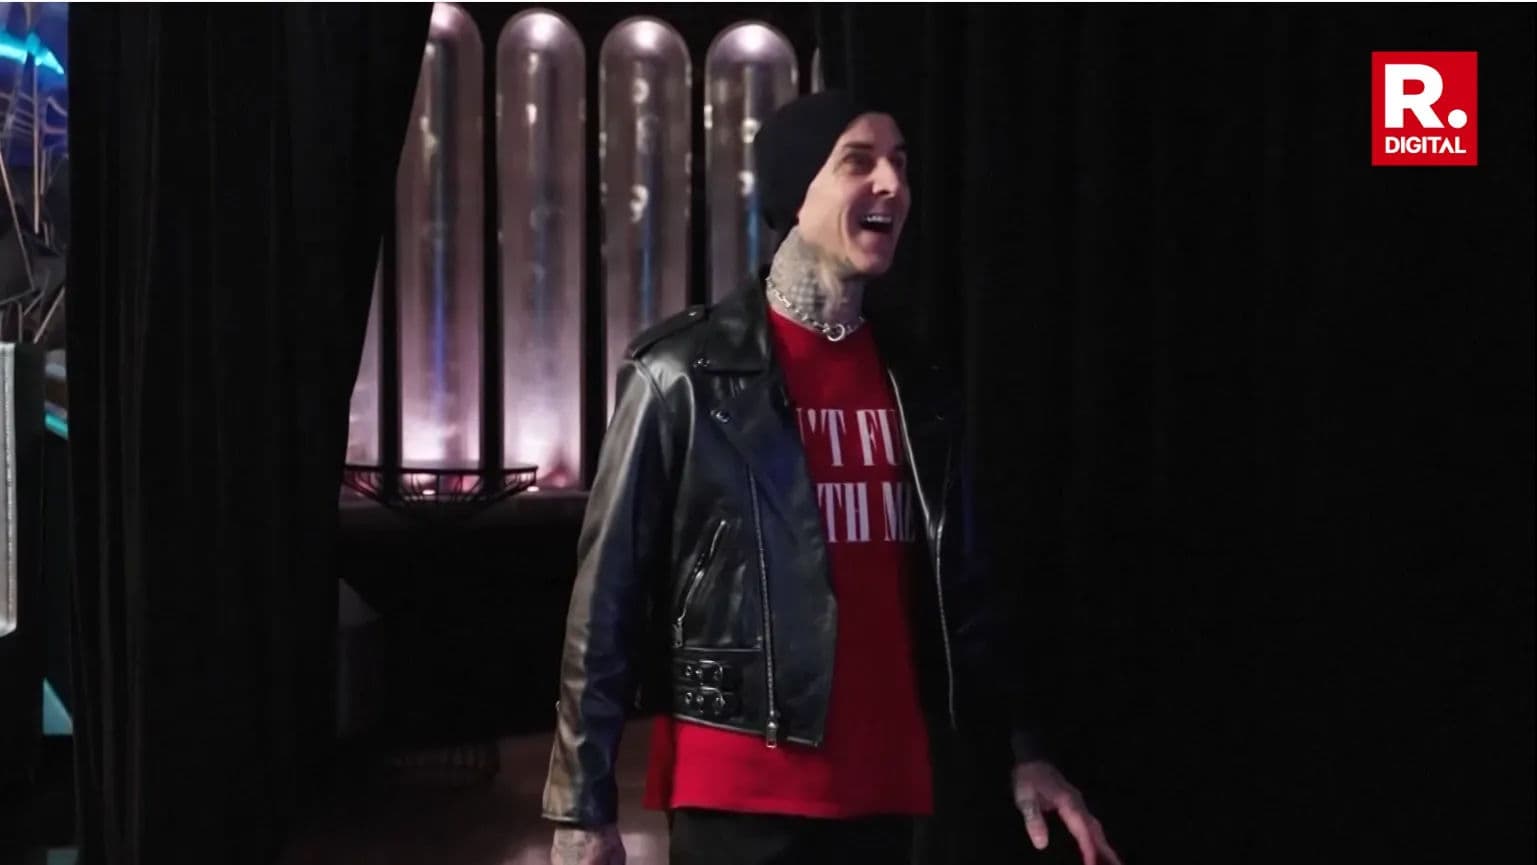 Travis Barker is visibly impressed when faced with his waxwork